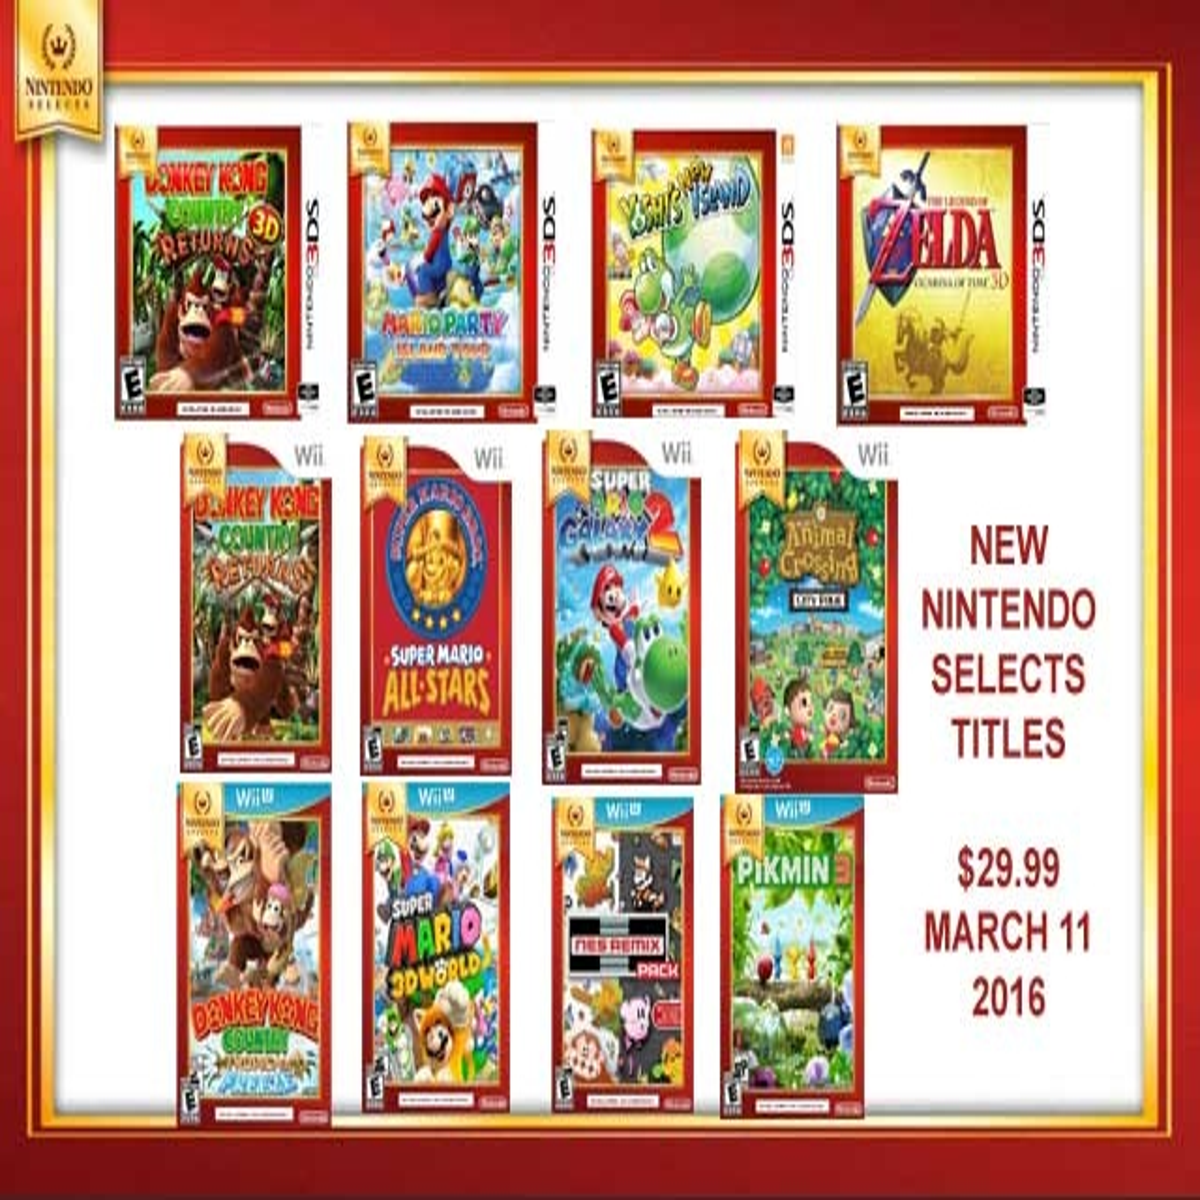 Wii U Nintendo Selects range comes to Australia on May 7th - Vooks